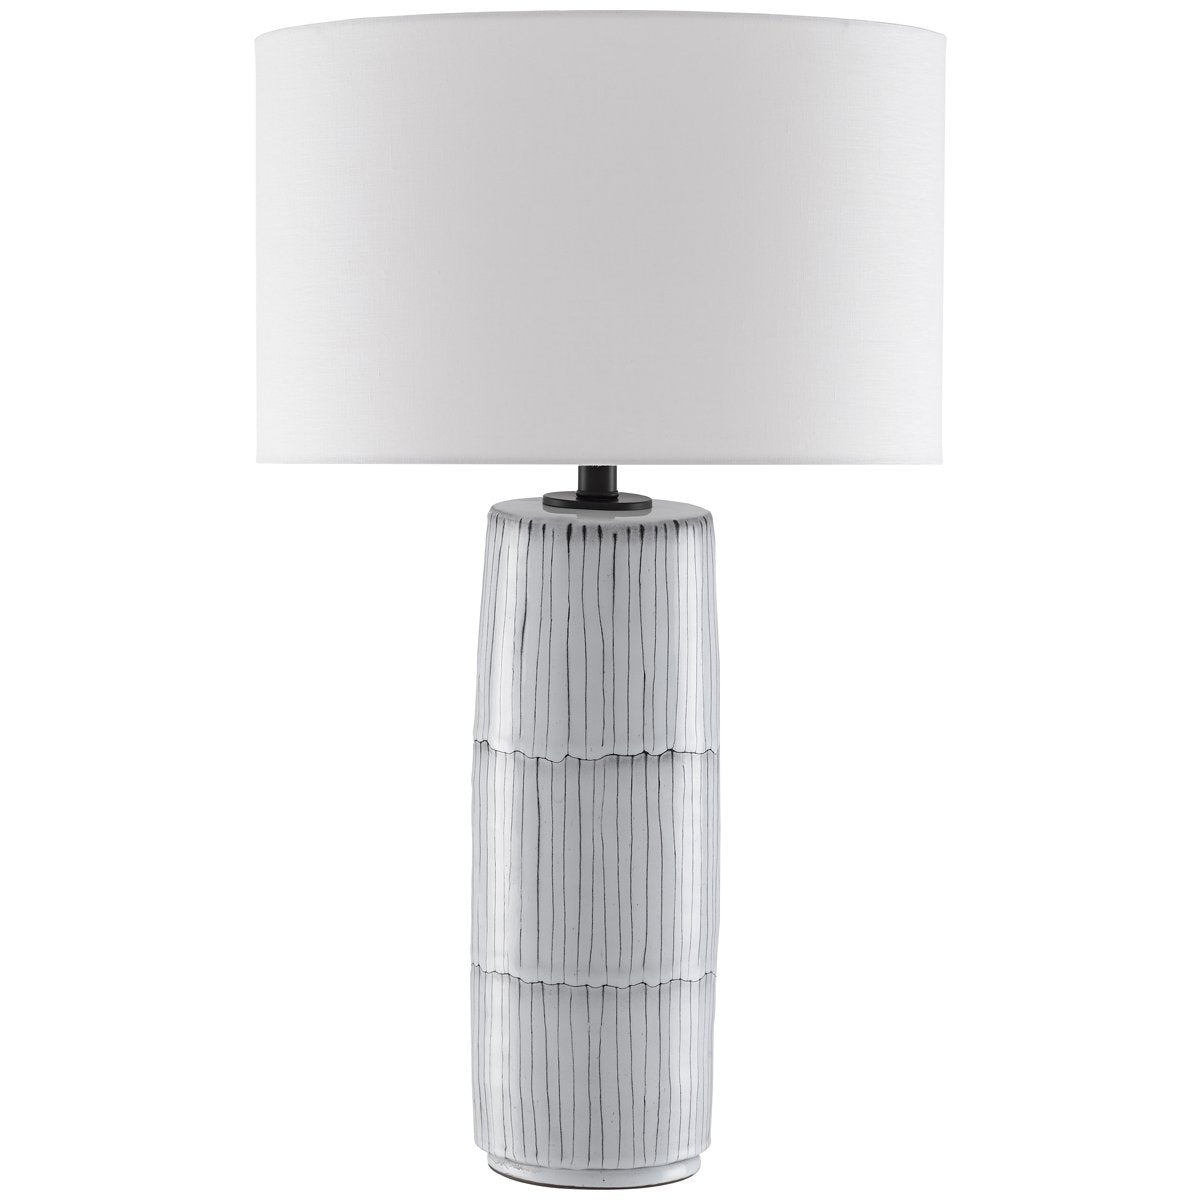 Currey and Company Chaarla Table Lamp